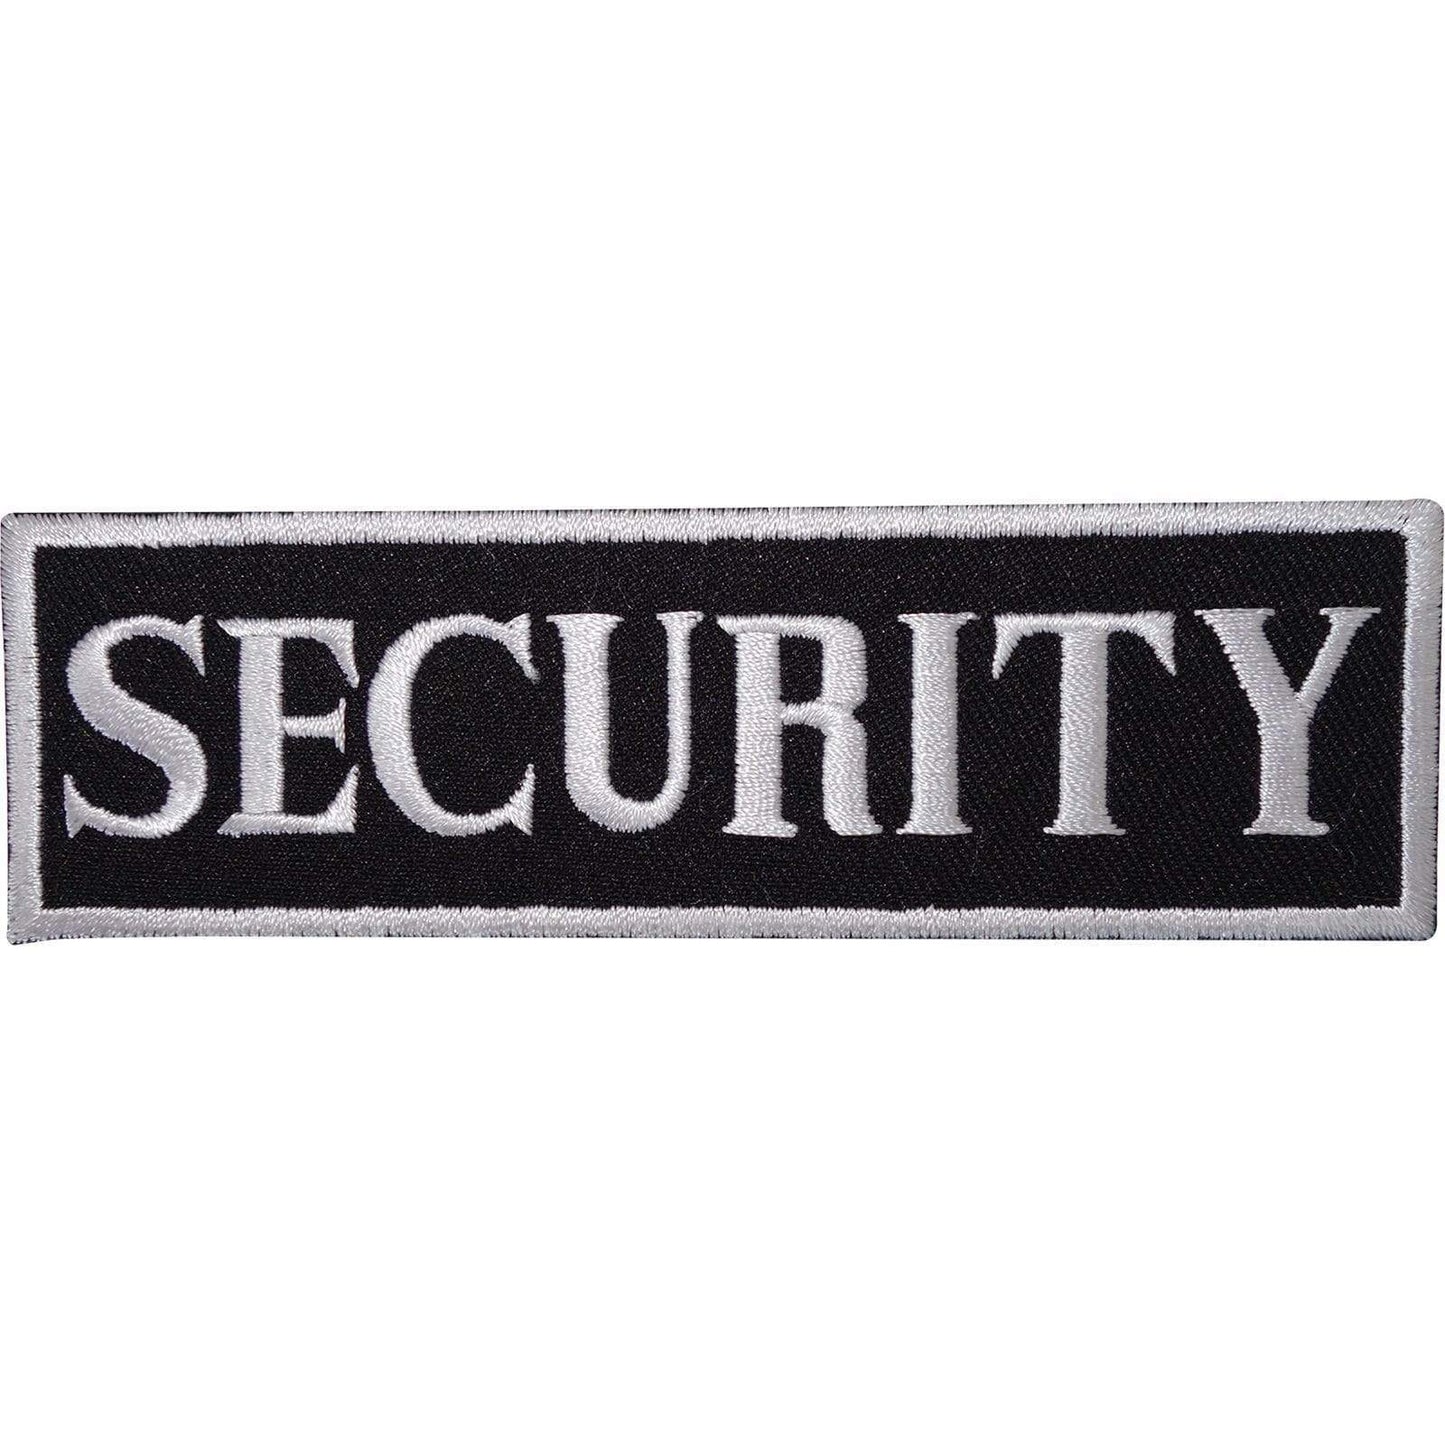 Security Embroidered Iron / Sew On Patch T Shirt Safety Vest Jacket Black Badge